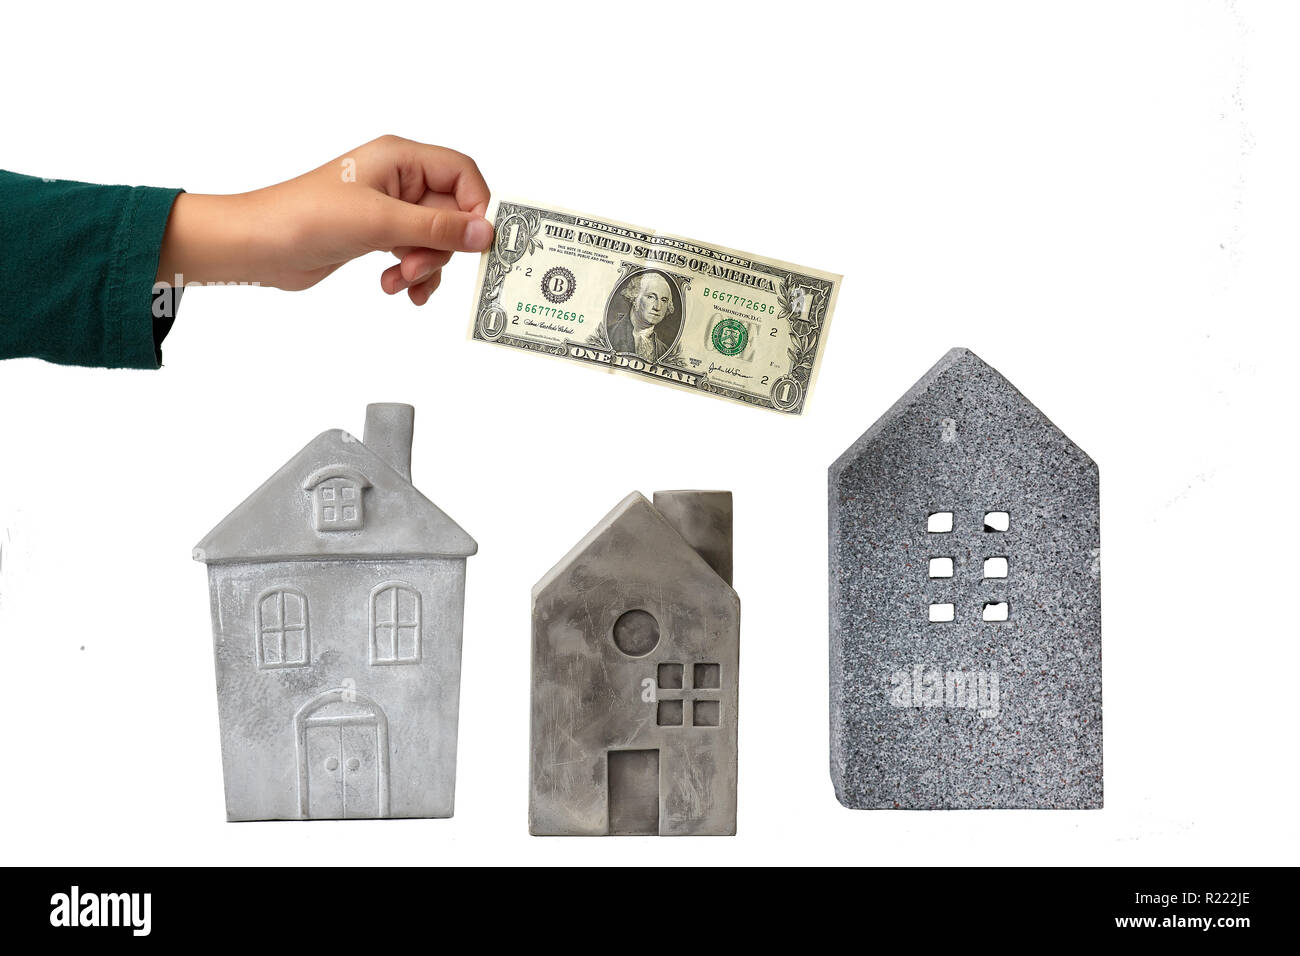 Crop hand holding money over houses Stock Photo